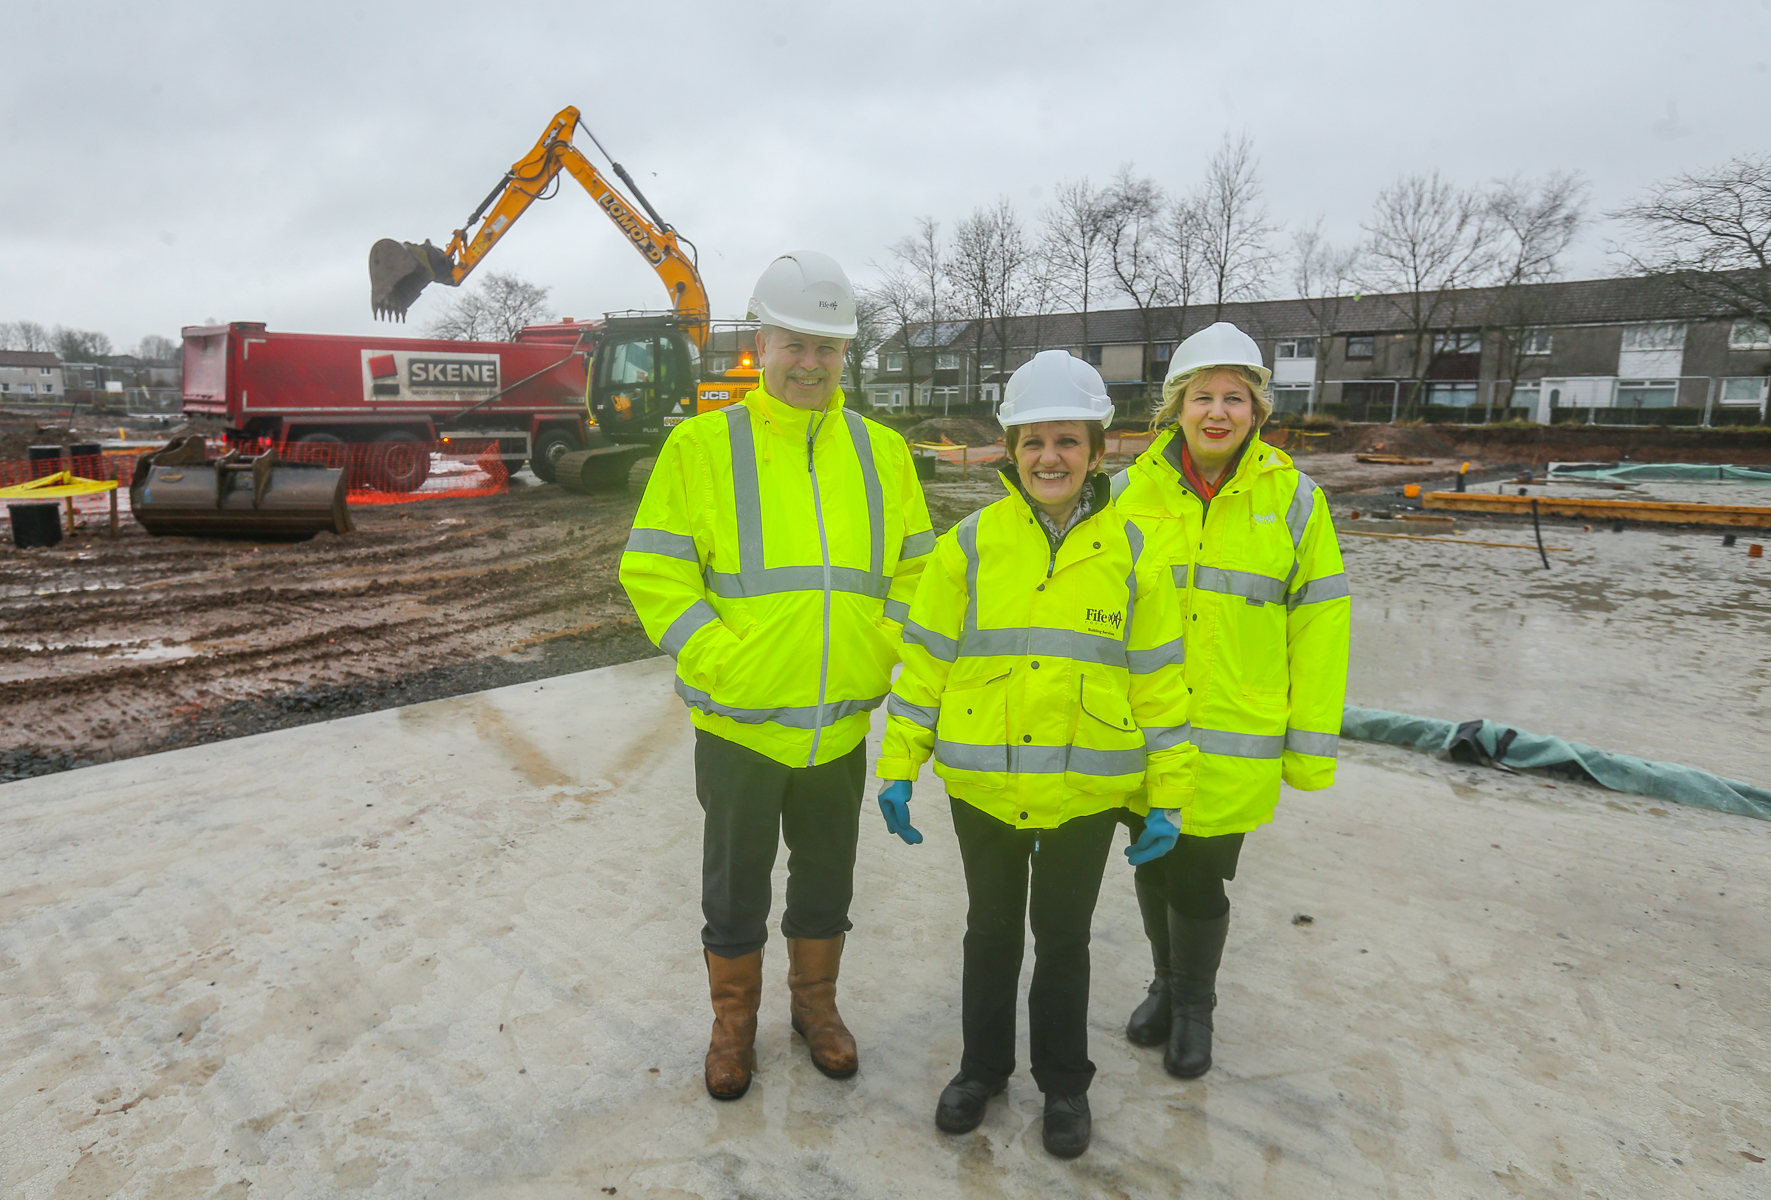 New council housing for Glenrothes